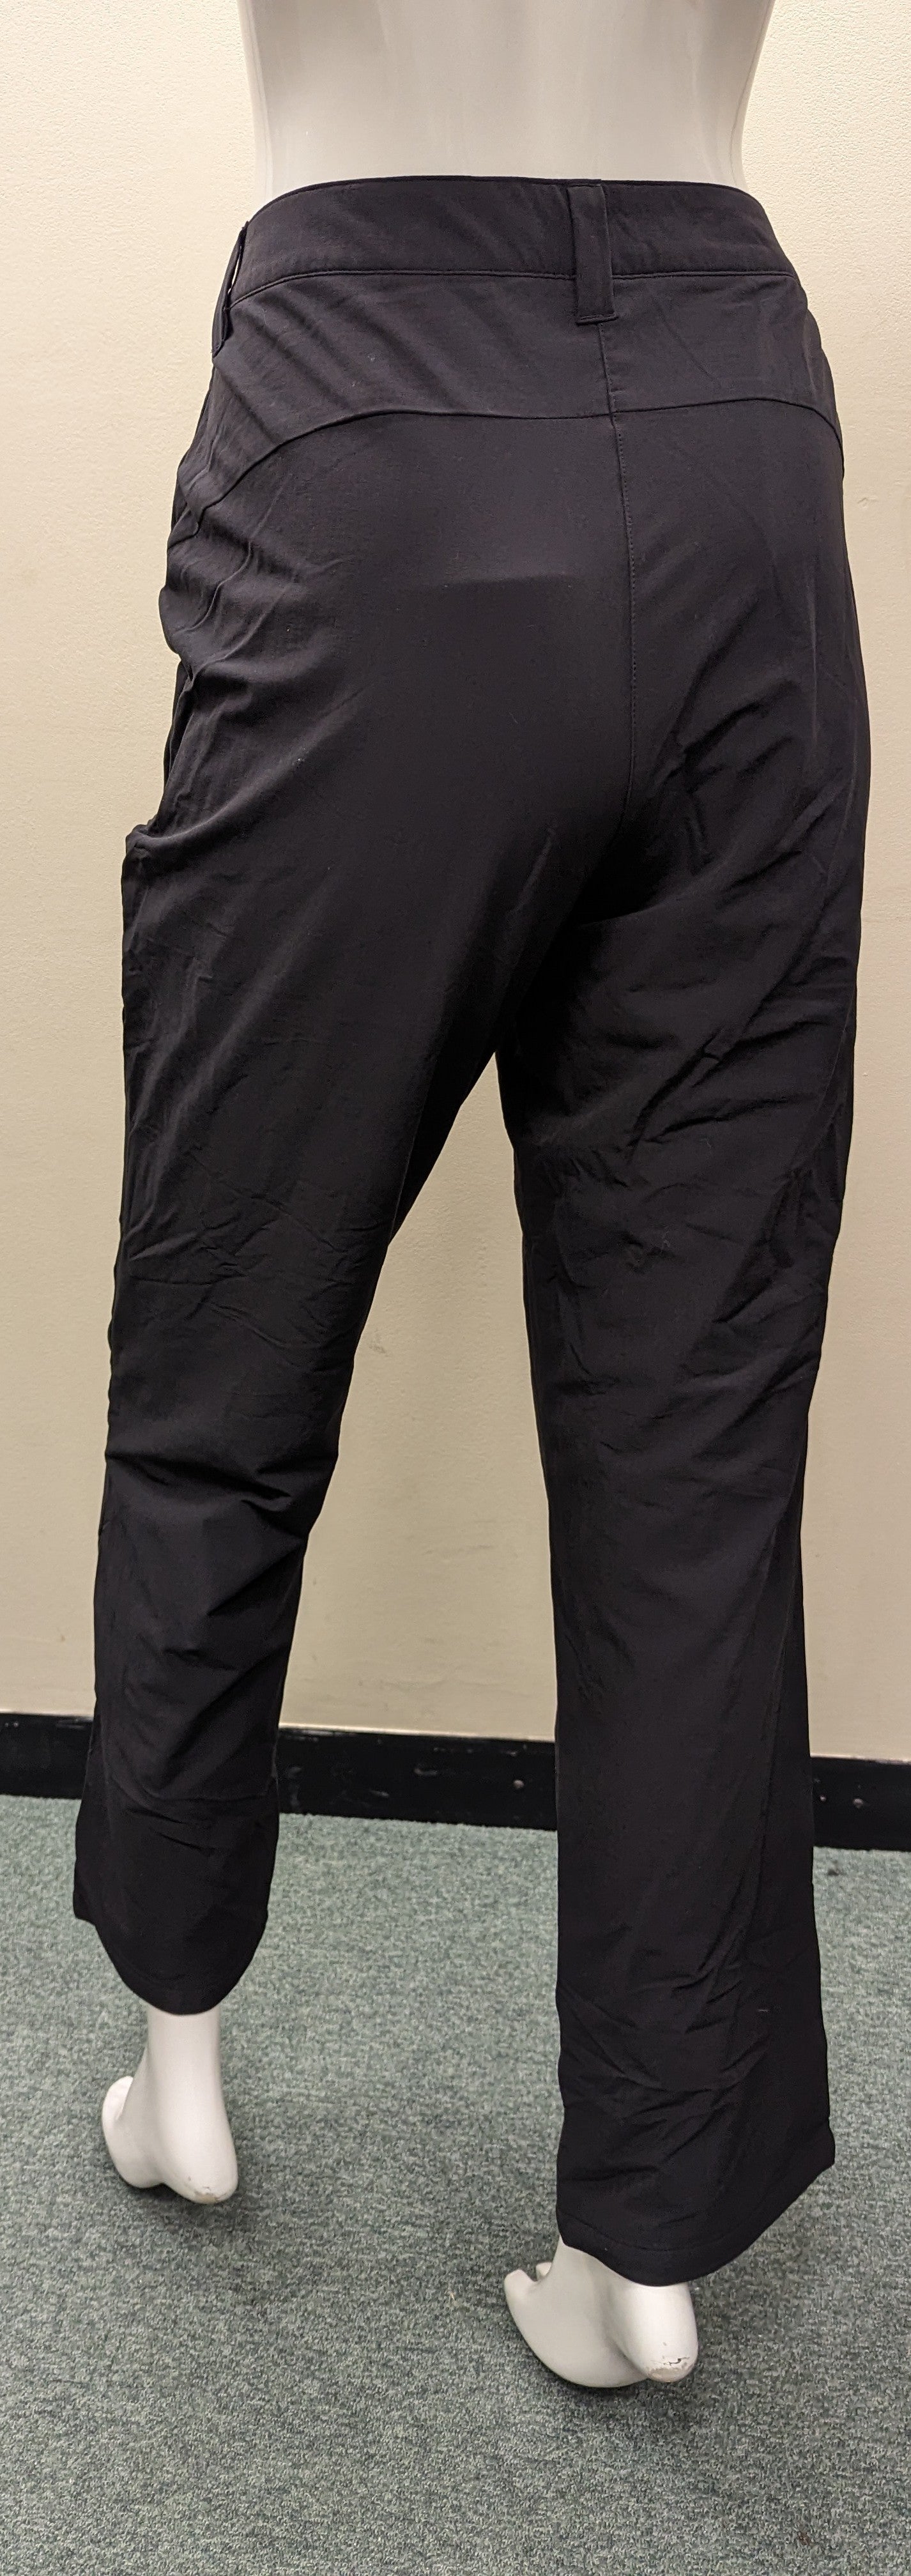 Ladies Rohan Insulated Trousers - Size 14R